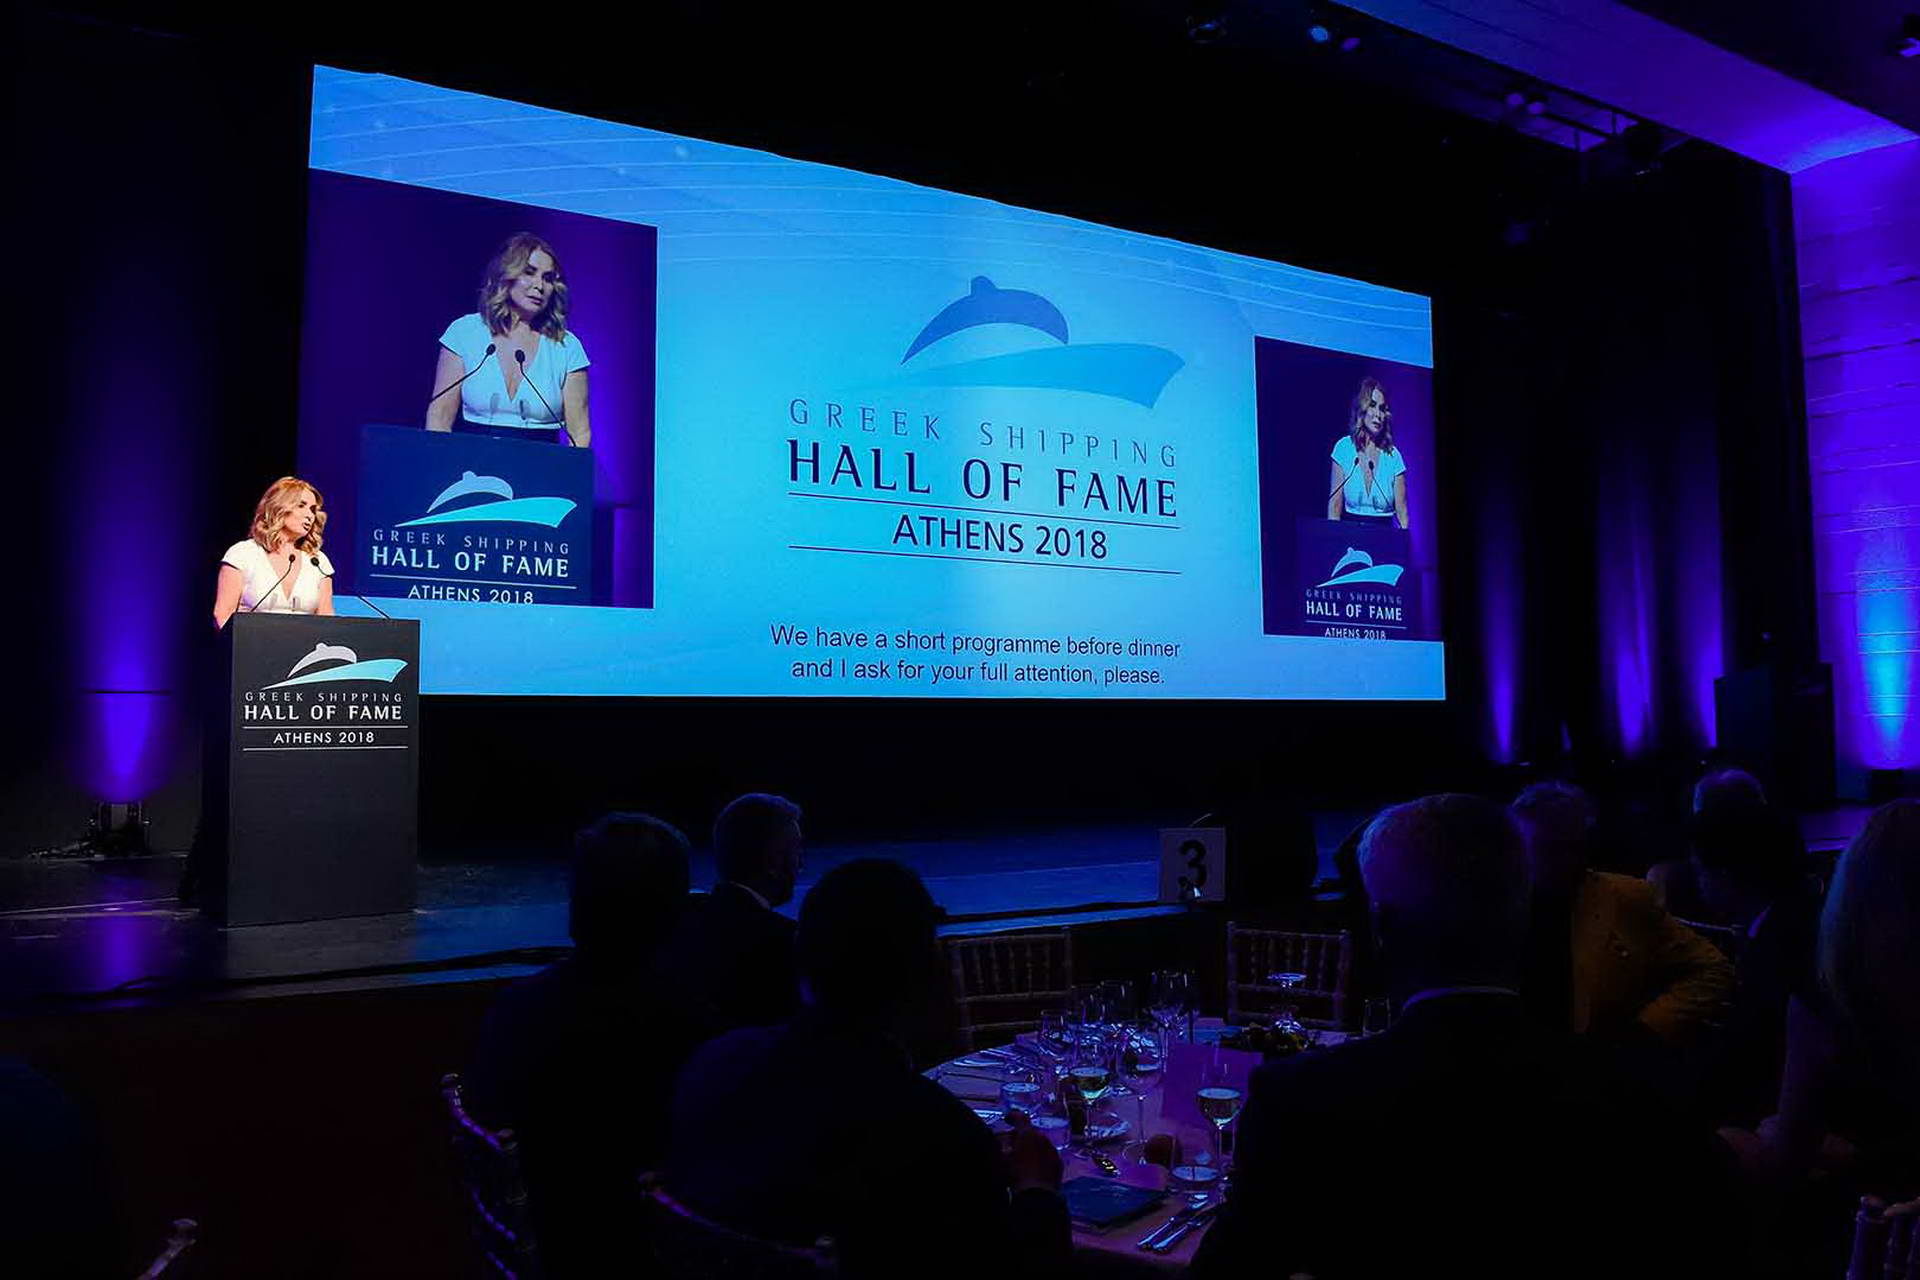 GREEK SHIPPING HALL OF FAME